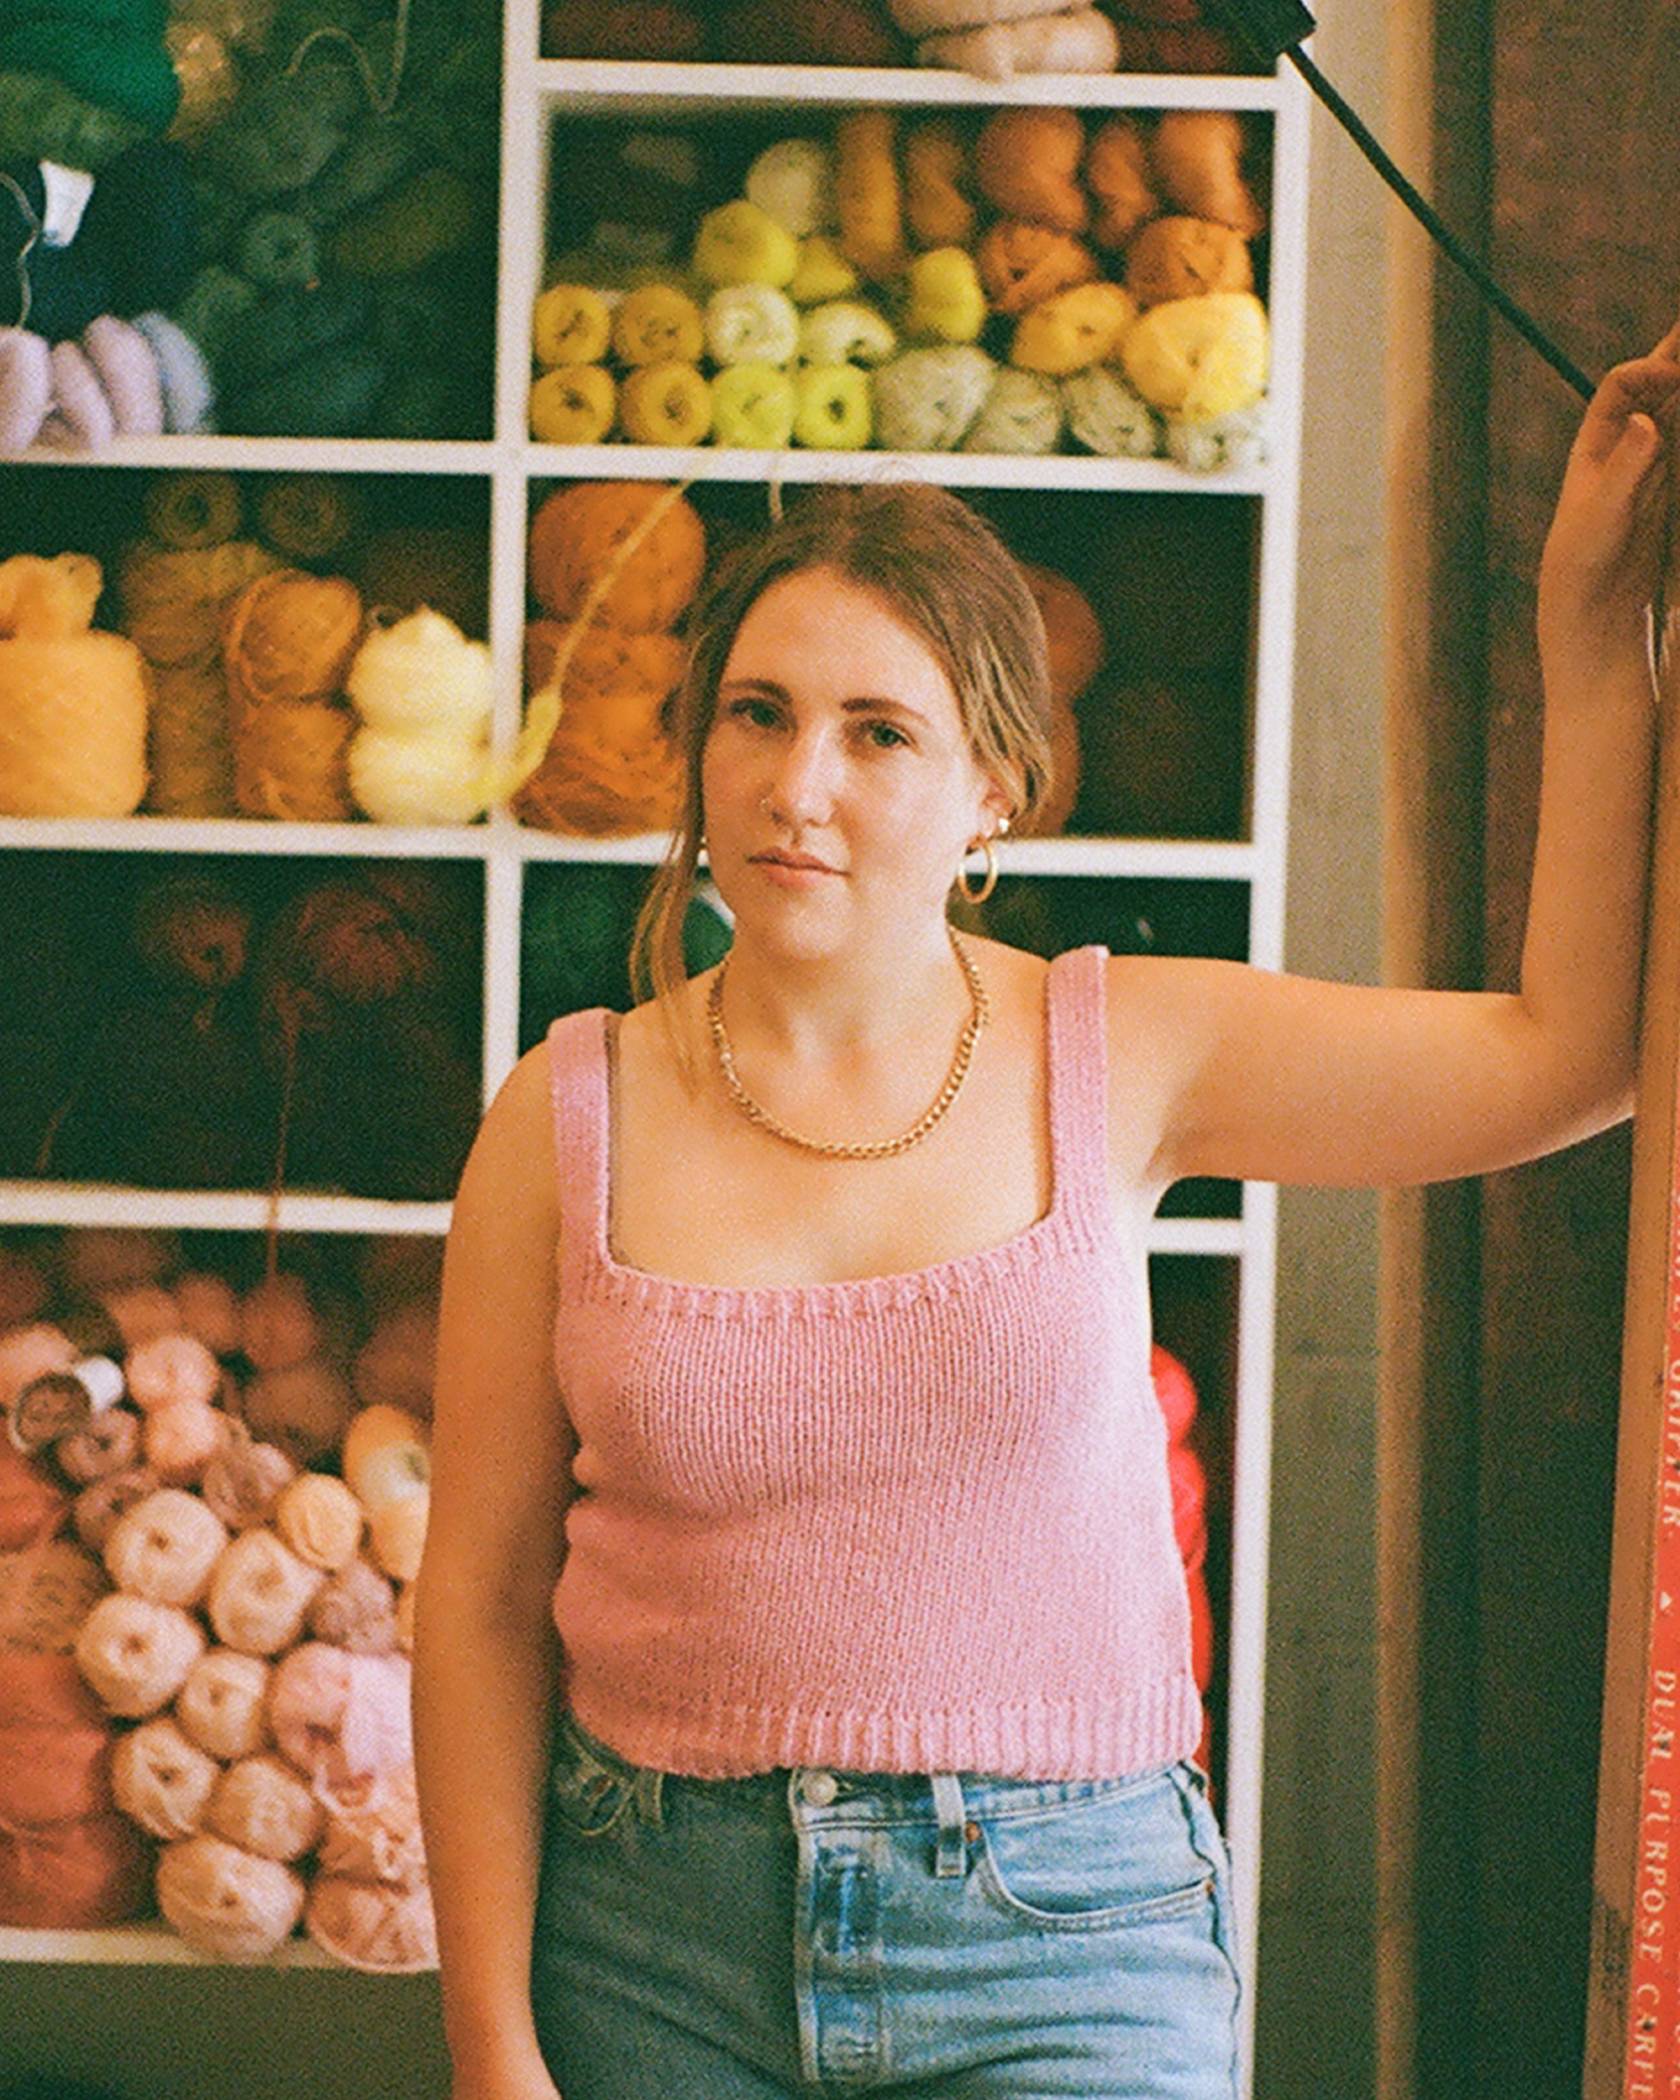 Caroline Kaufman wearing a levis denim jeans and standing in front of a shelve full of different colored yarn